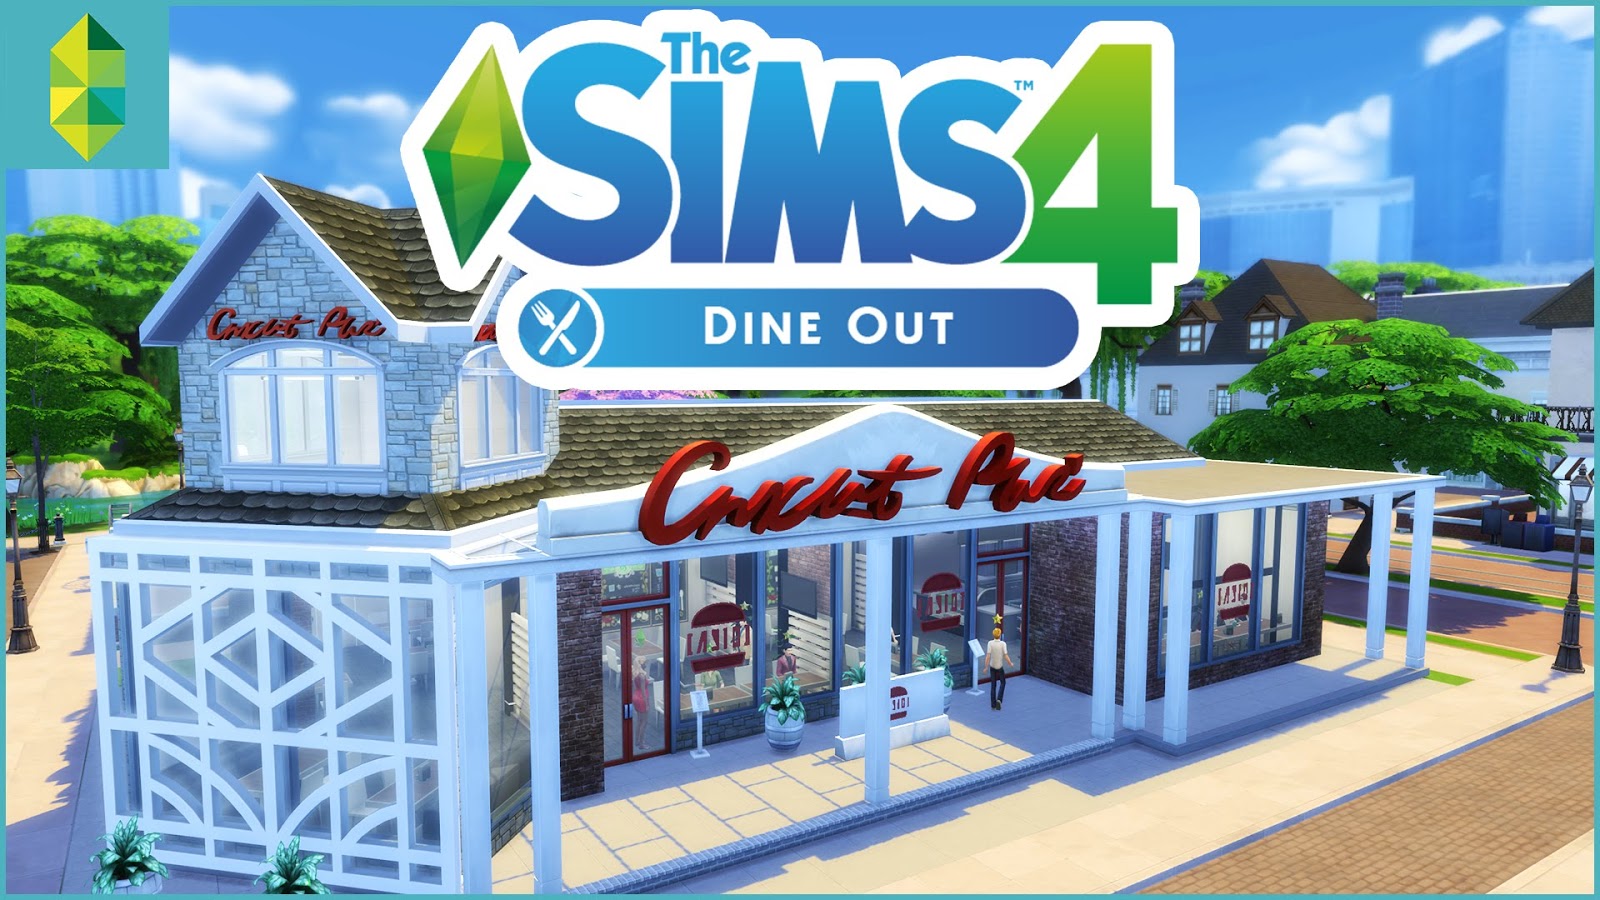 Link Download The Sims 4 Dine Out